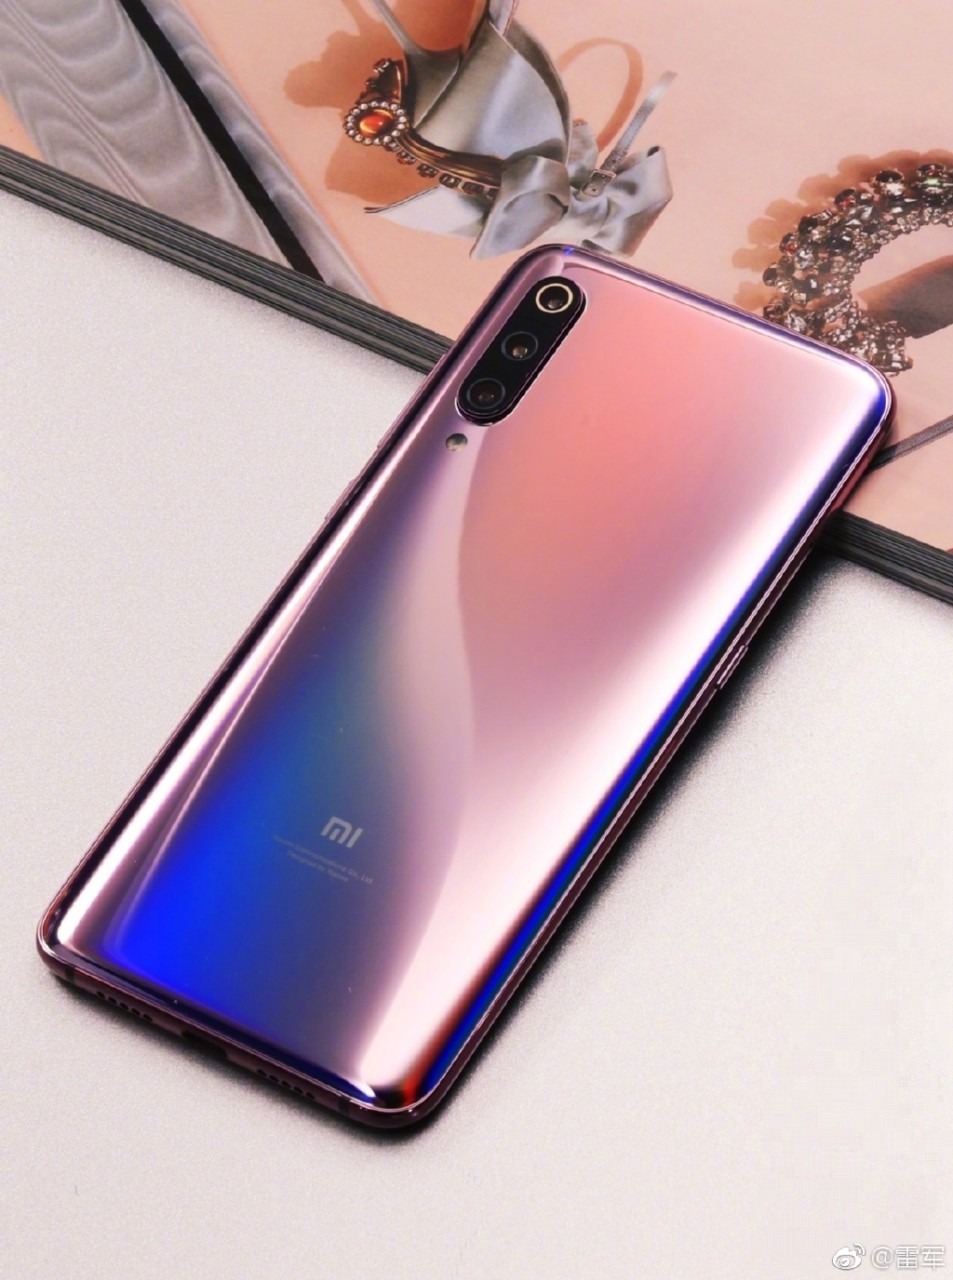 Xiaomi Mi 9 Rumors, Launch Livestream, Specifications, Attributes And Price